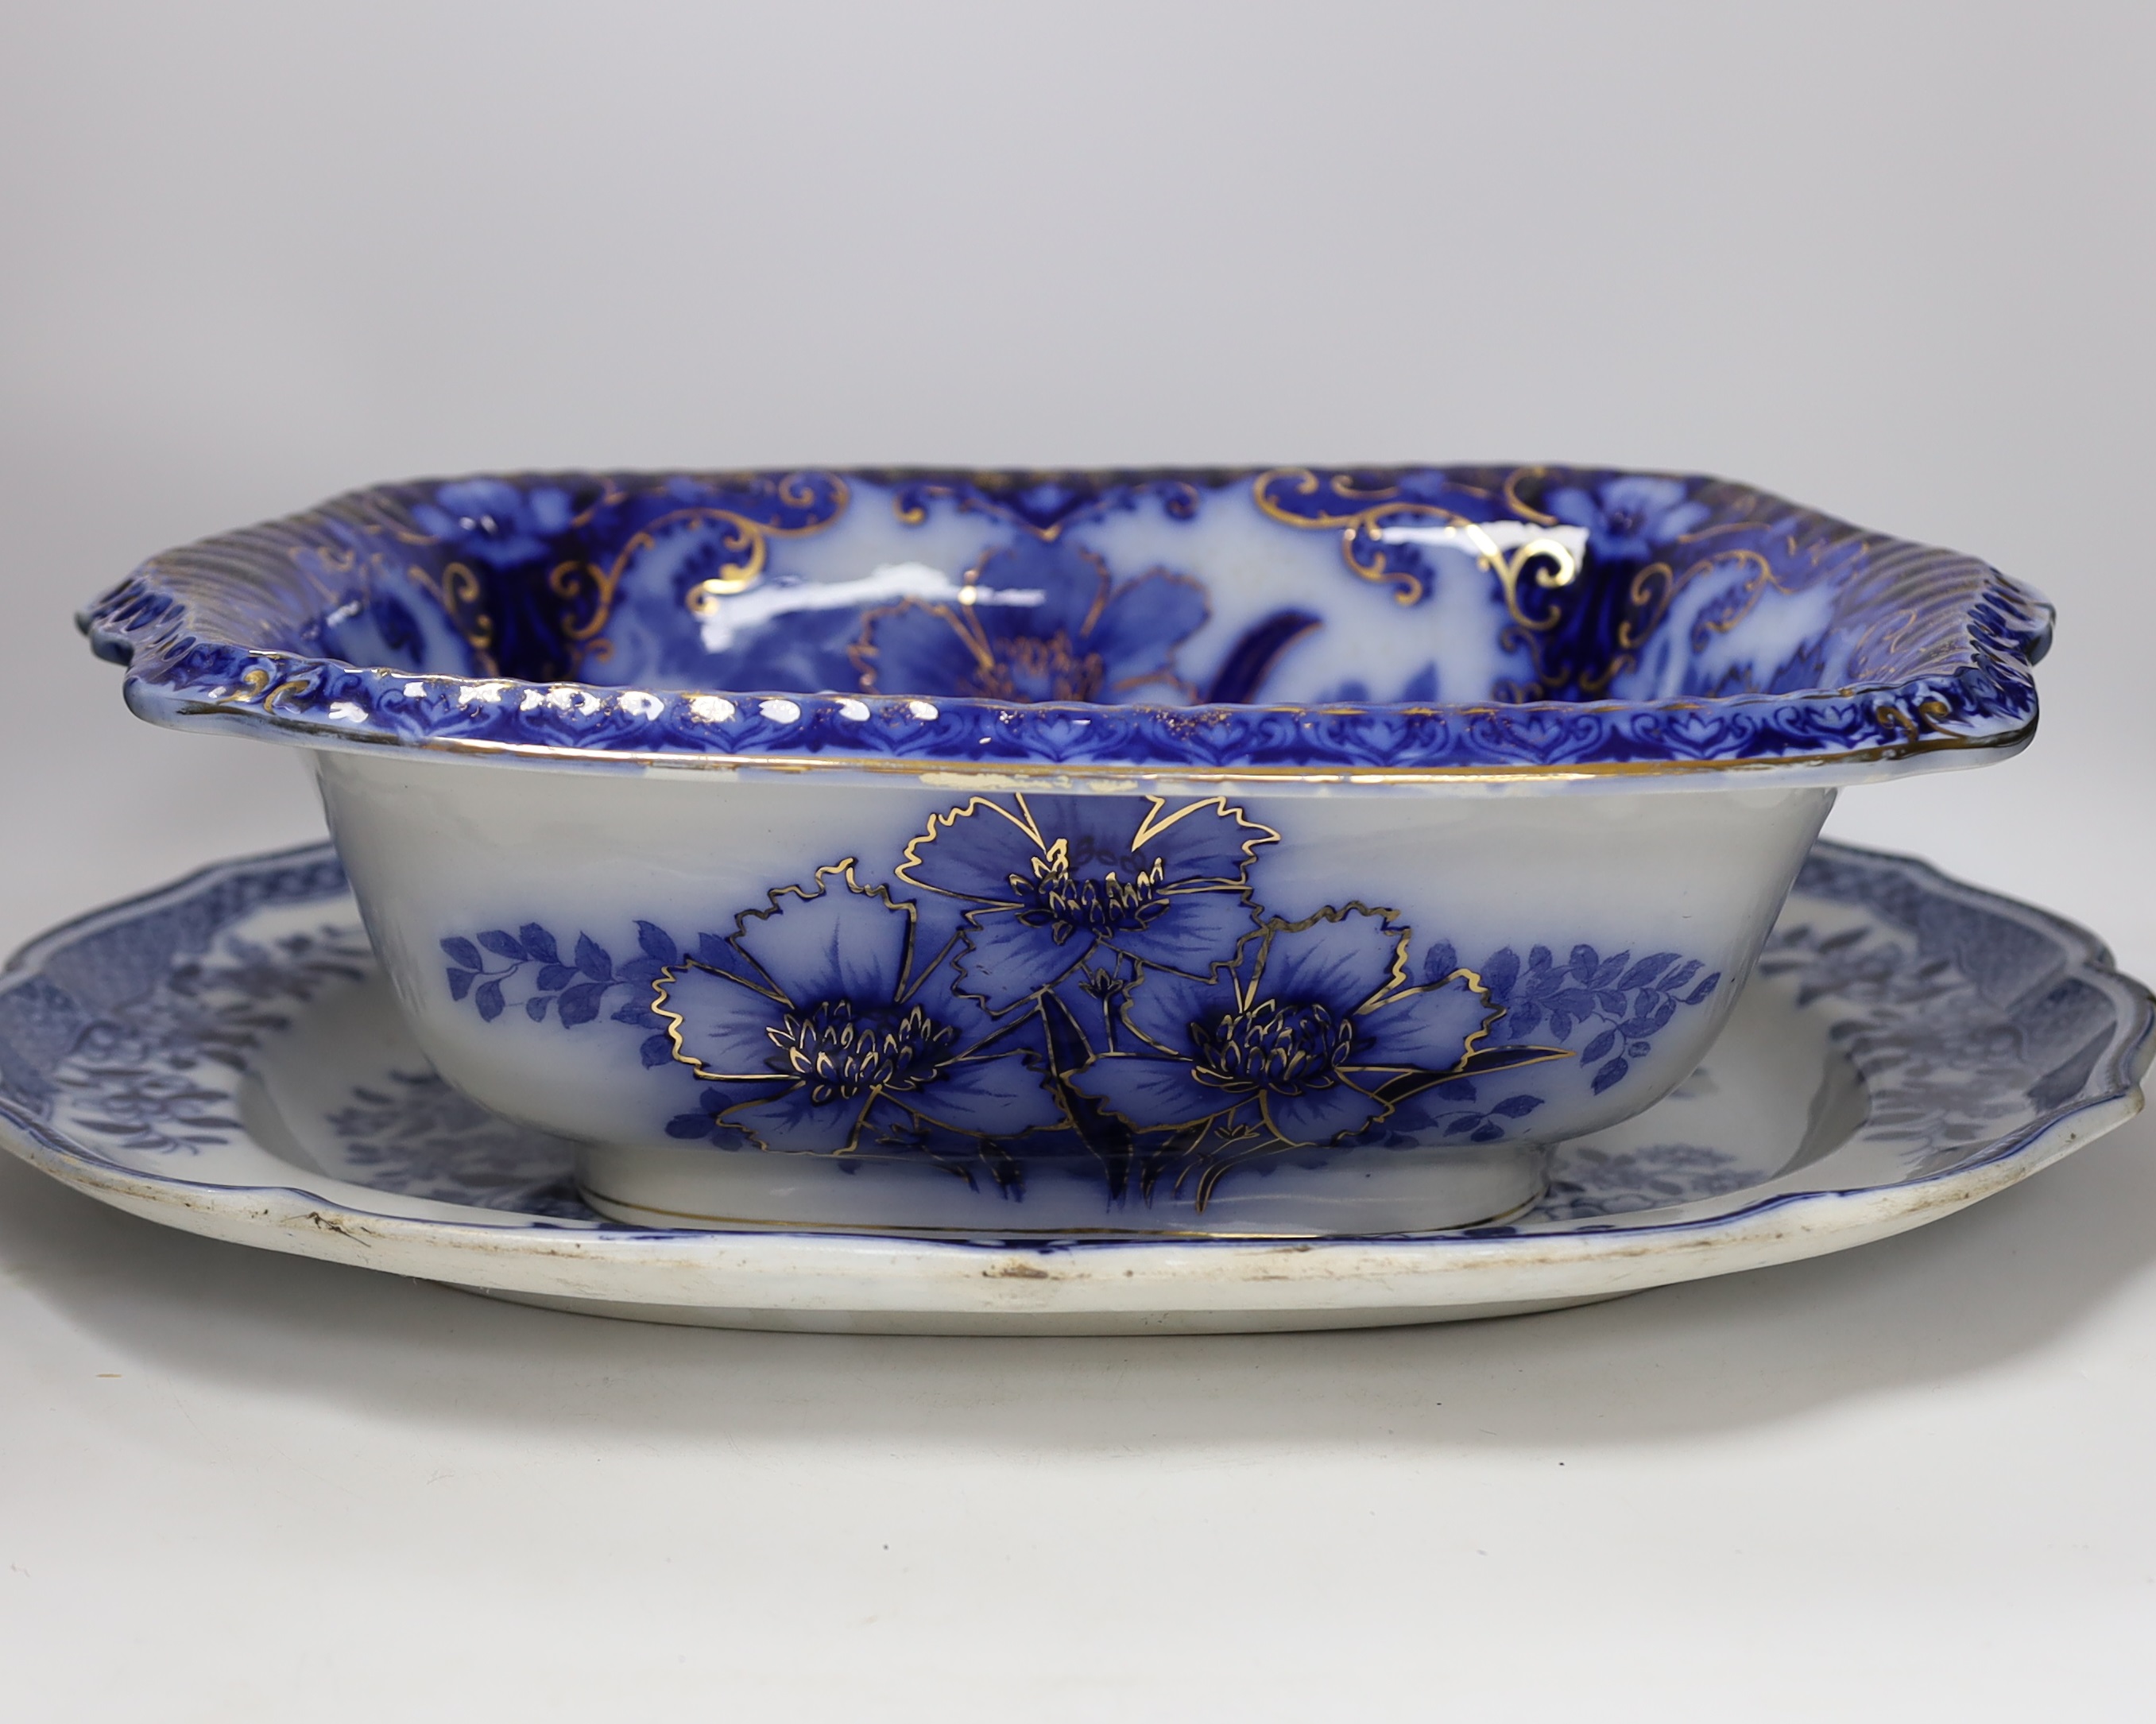 A Flow blue and gilt decorated bowl, a blue and white meat platter, a Royal Doulton vase, a gilt Egyptian inspired centrepiece and a set of six gilt bordered plates